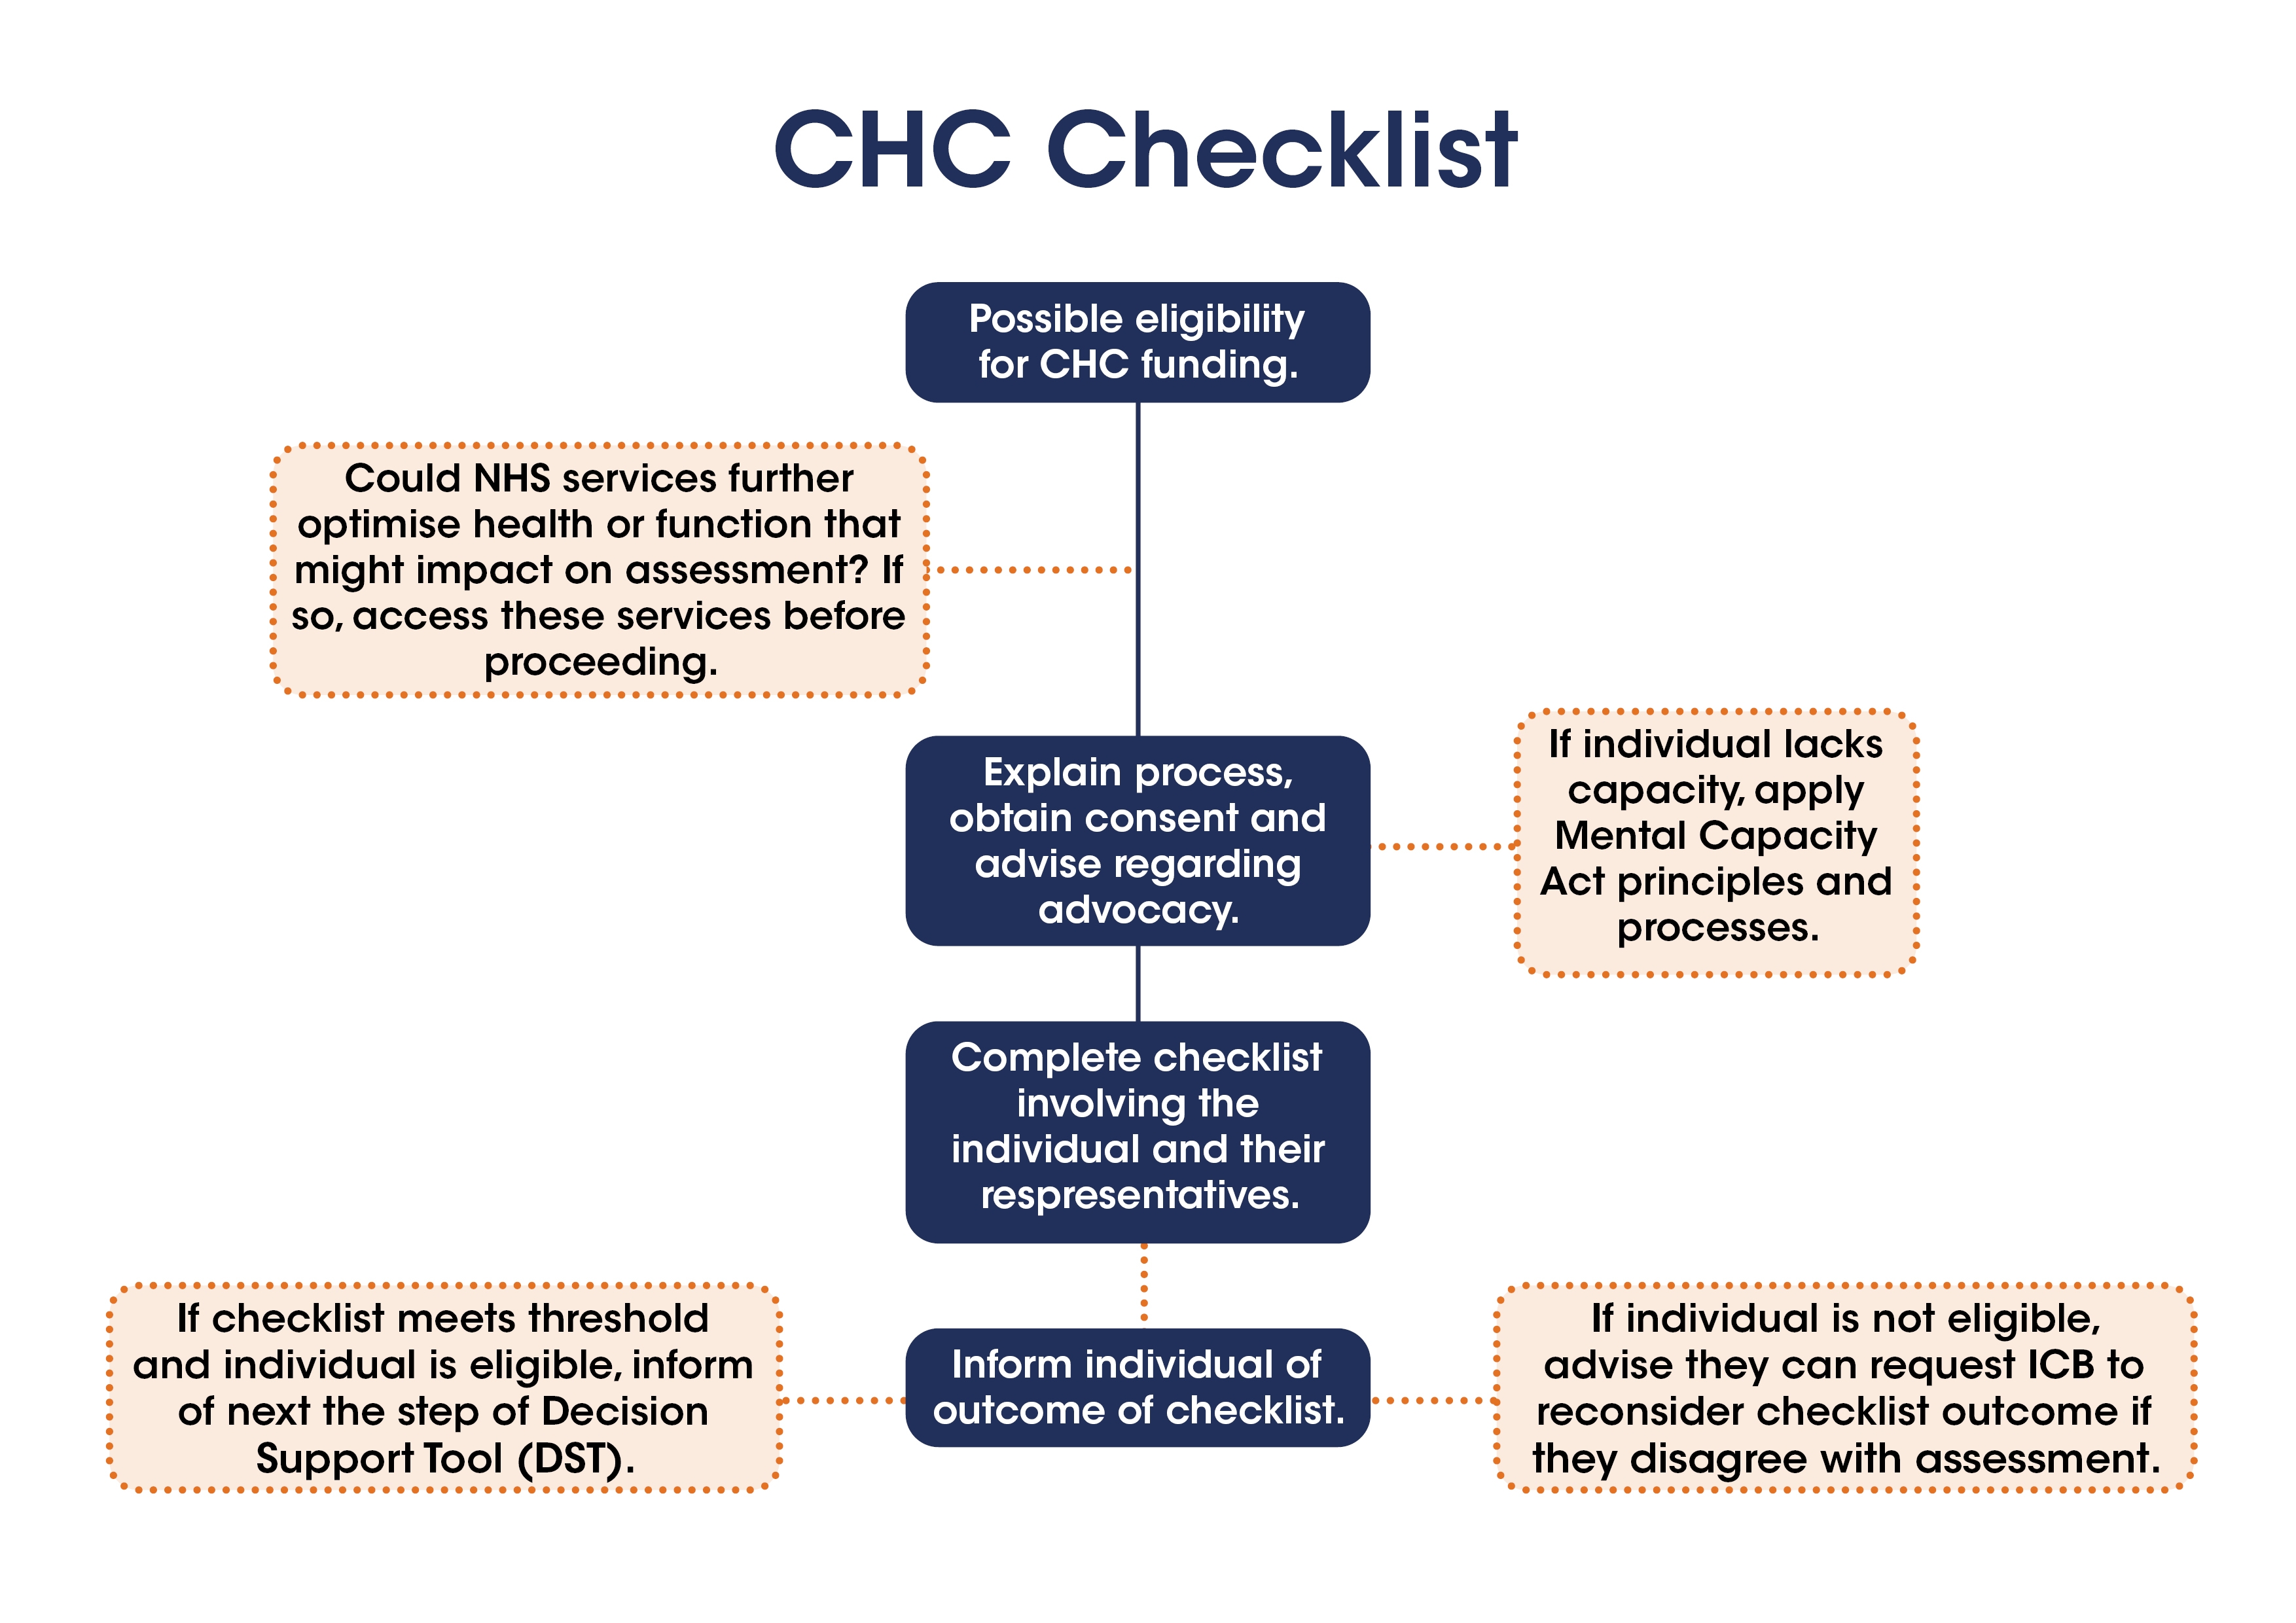 A flow chart of the CHC Checklist process